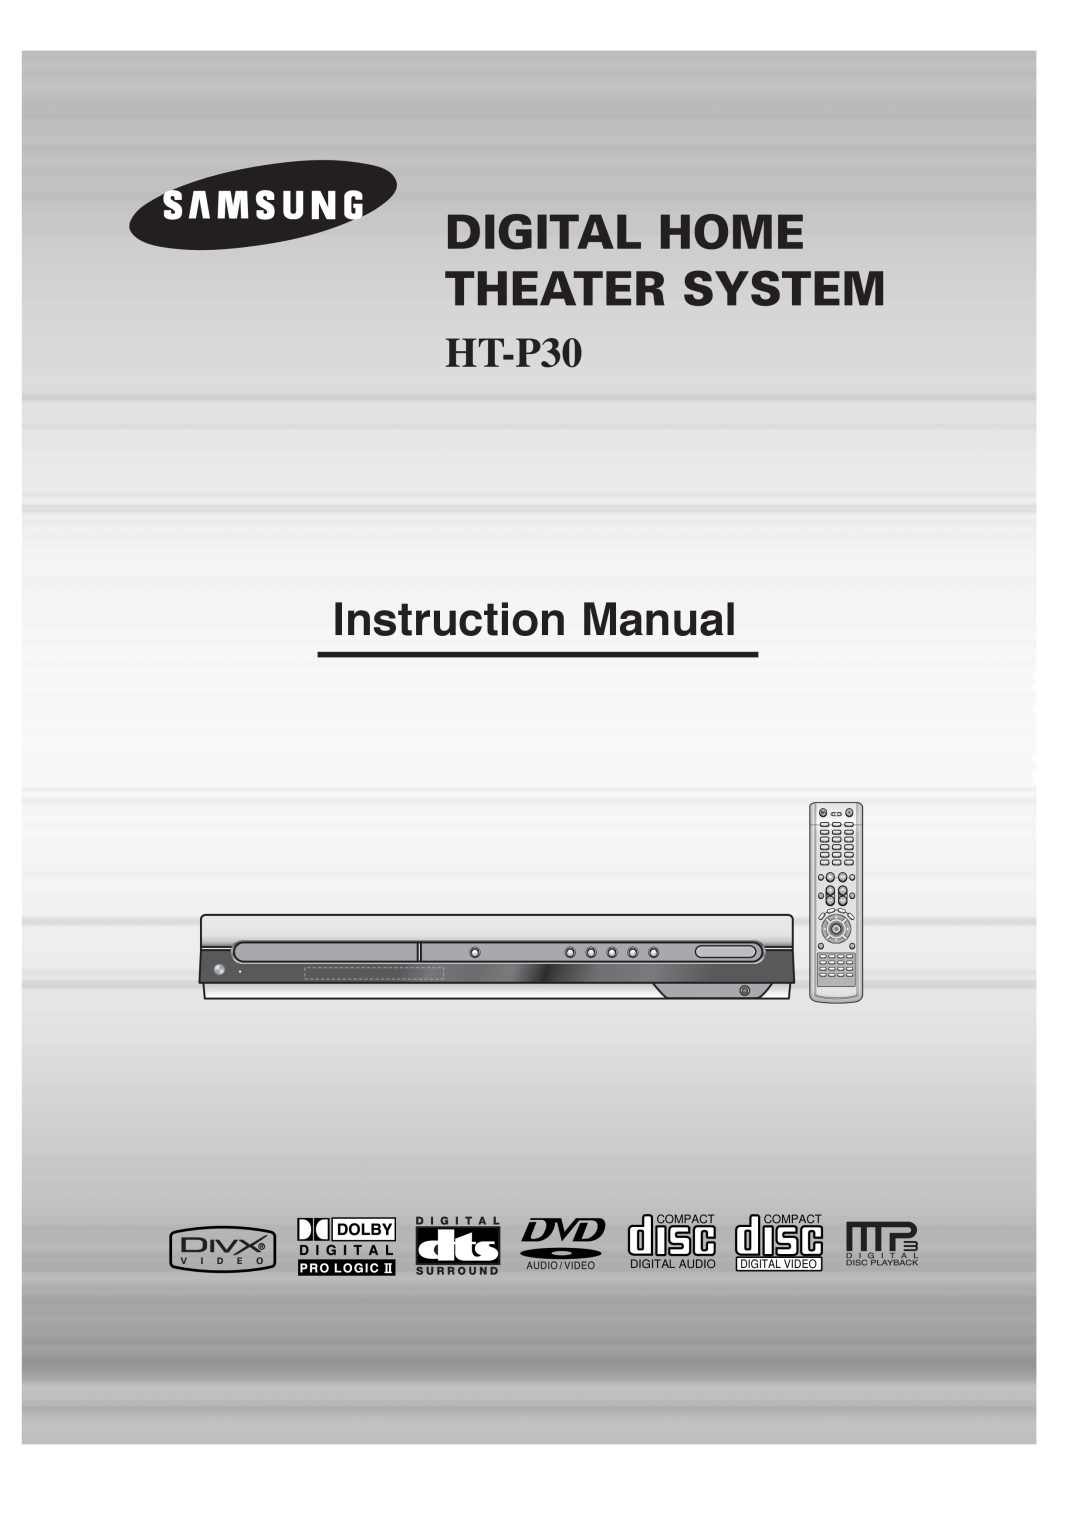 Samsung HT-P30 instruction manual Digital Home Theater System, Compact Compact, Digital Audio 